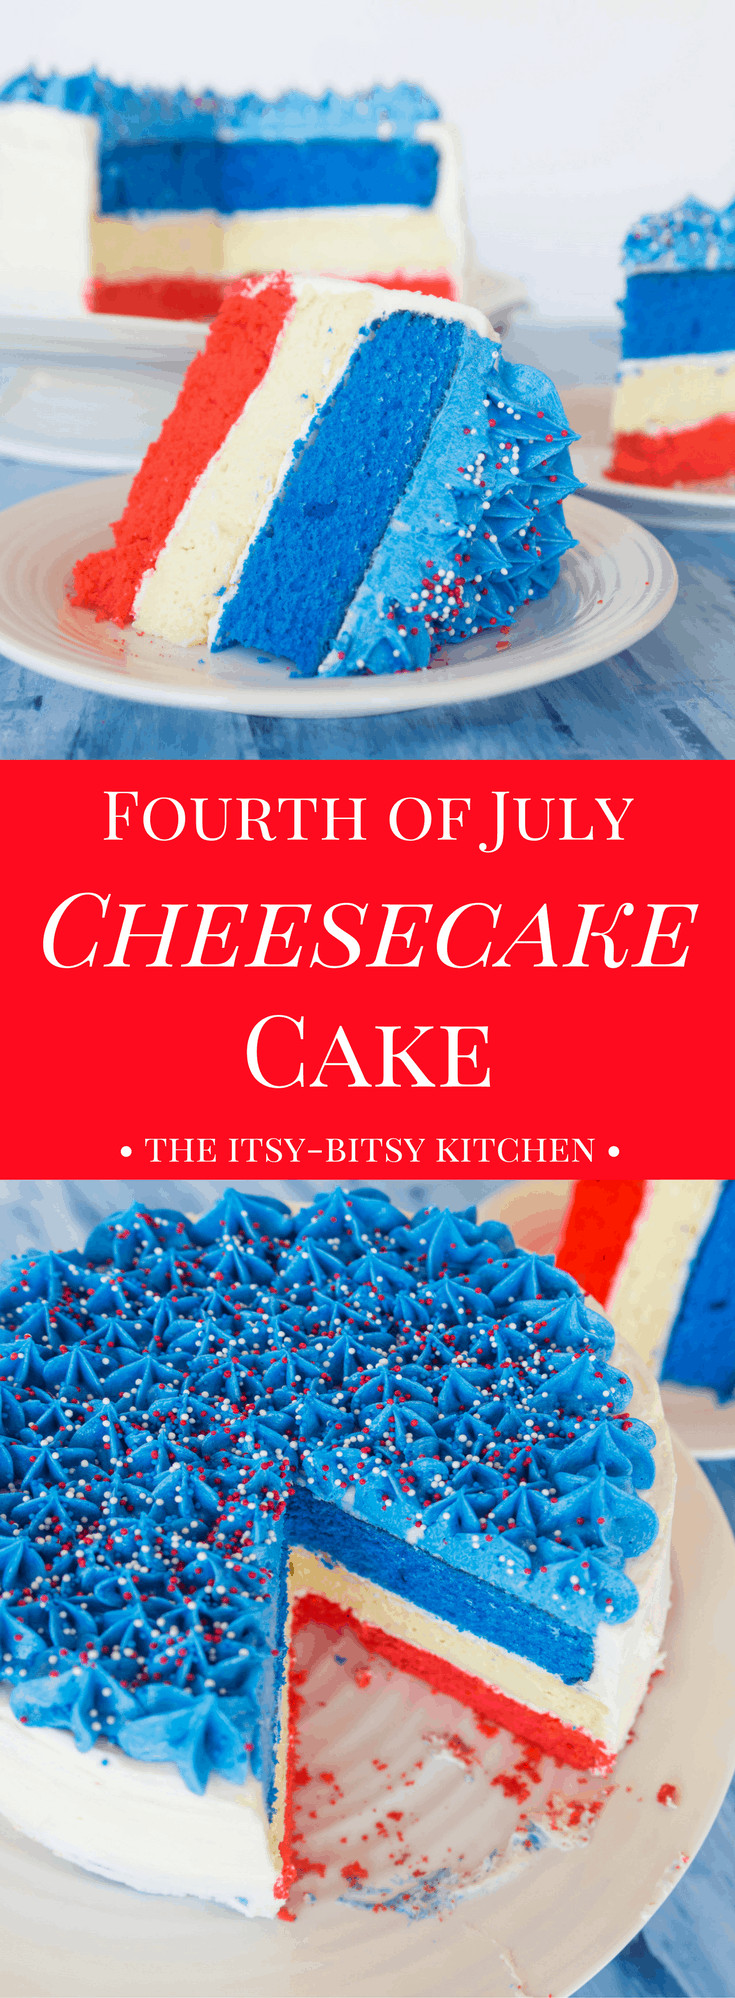 4Th Of July Cake Recipes
 Fourth of July Cheesecake Cake